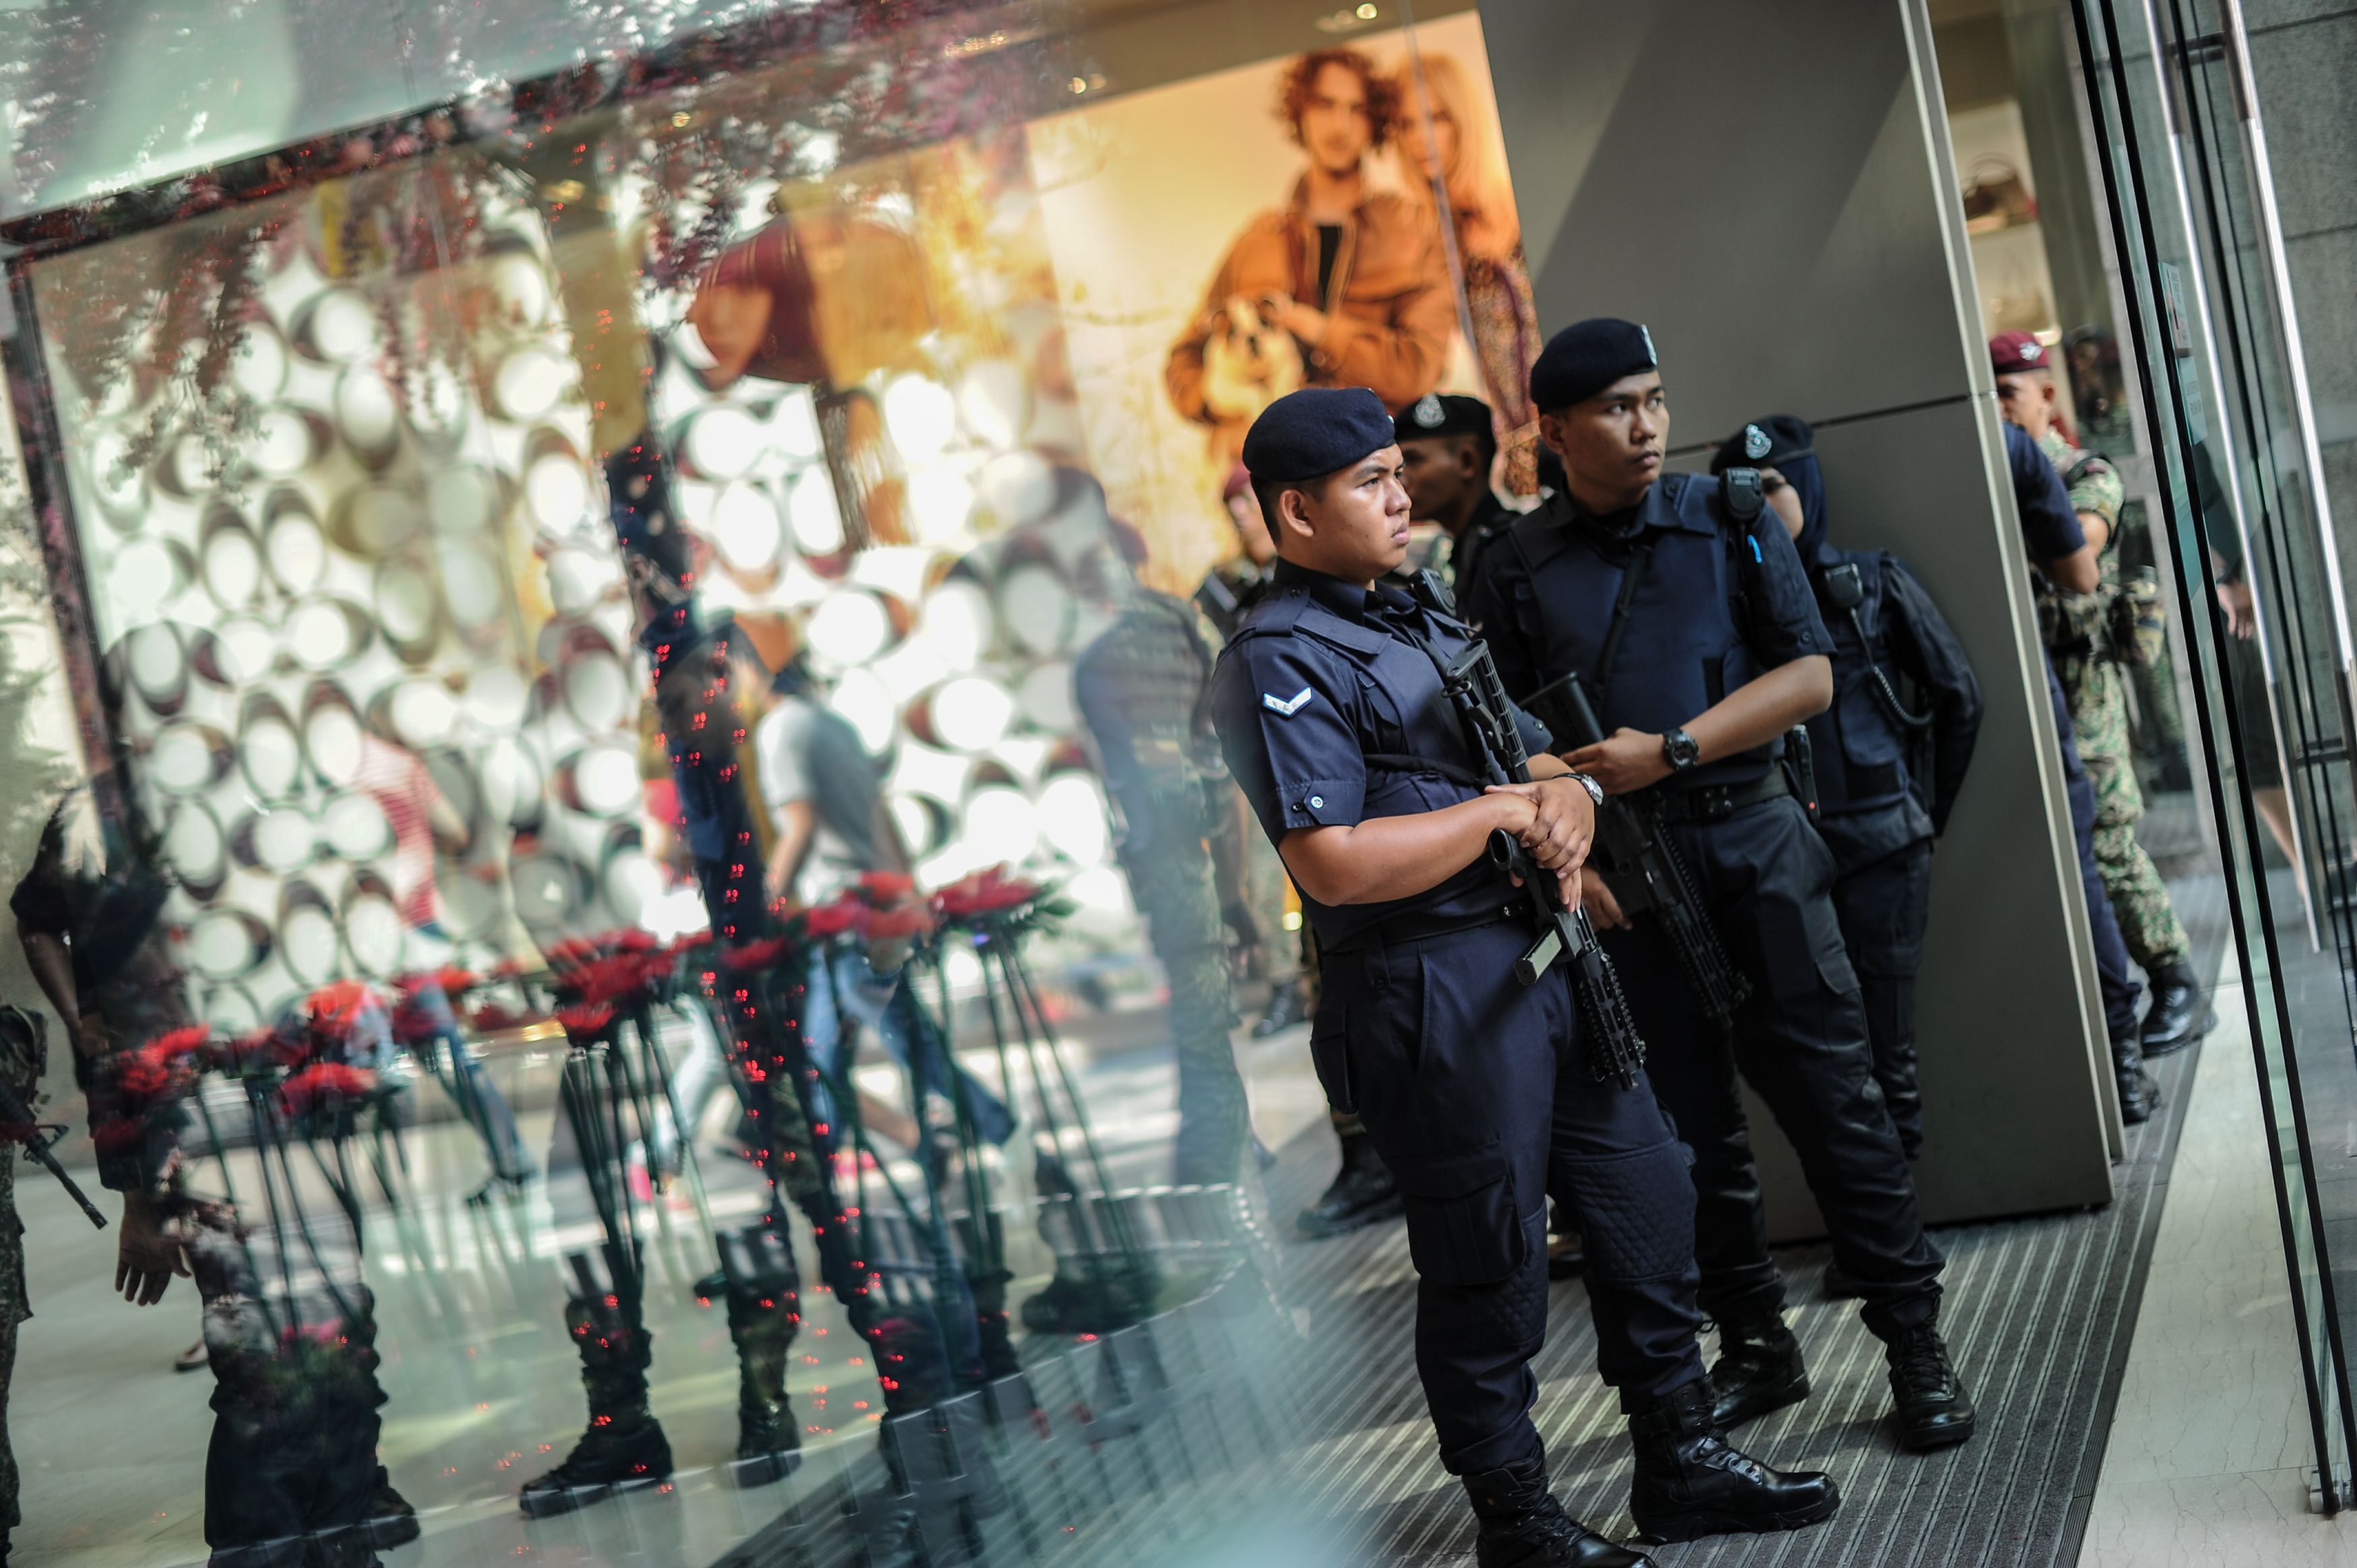 Malaysian police stand guard before the arrival of Prime Minister Najib Razak during a joint police-army exercise at a shopping mall in Kuala Lumpur on Feb. 22, 2016 (Mohd Rasfan—AFP/Getty Images)